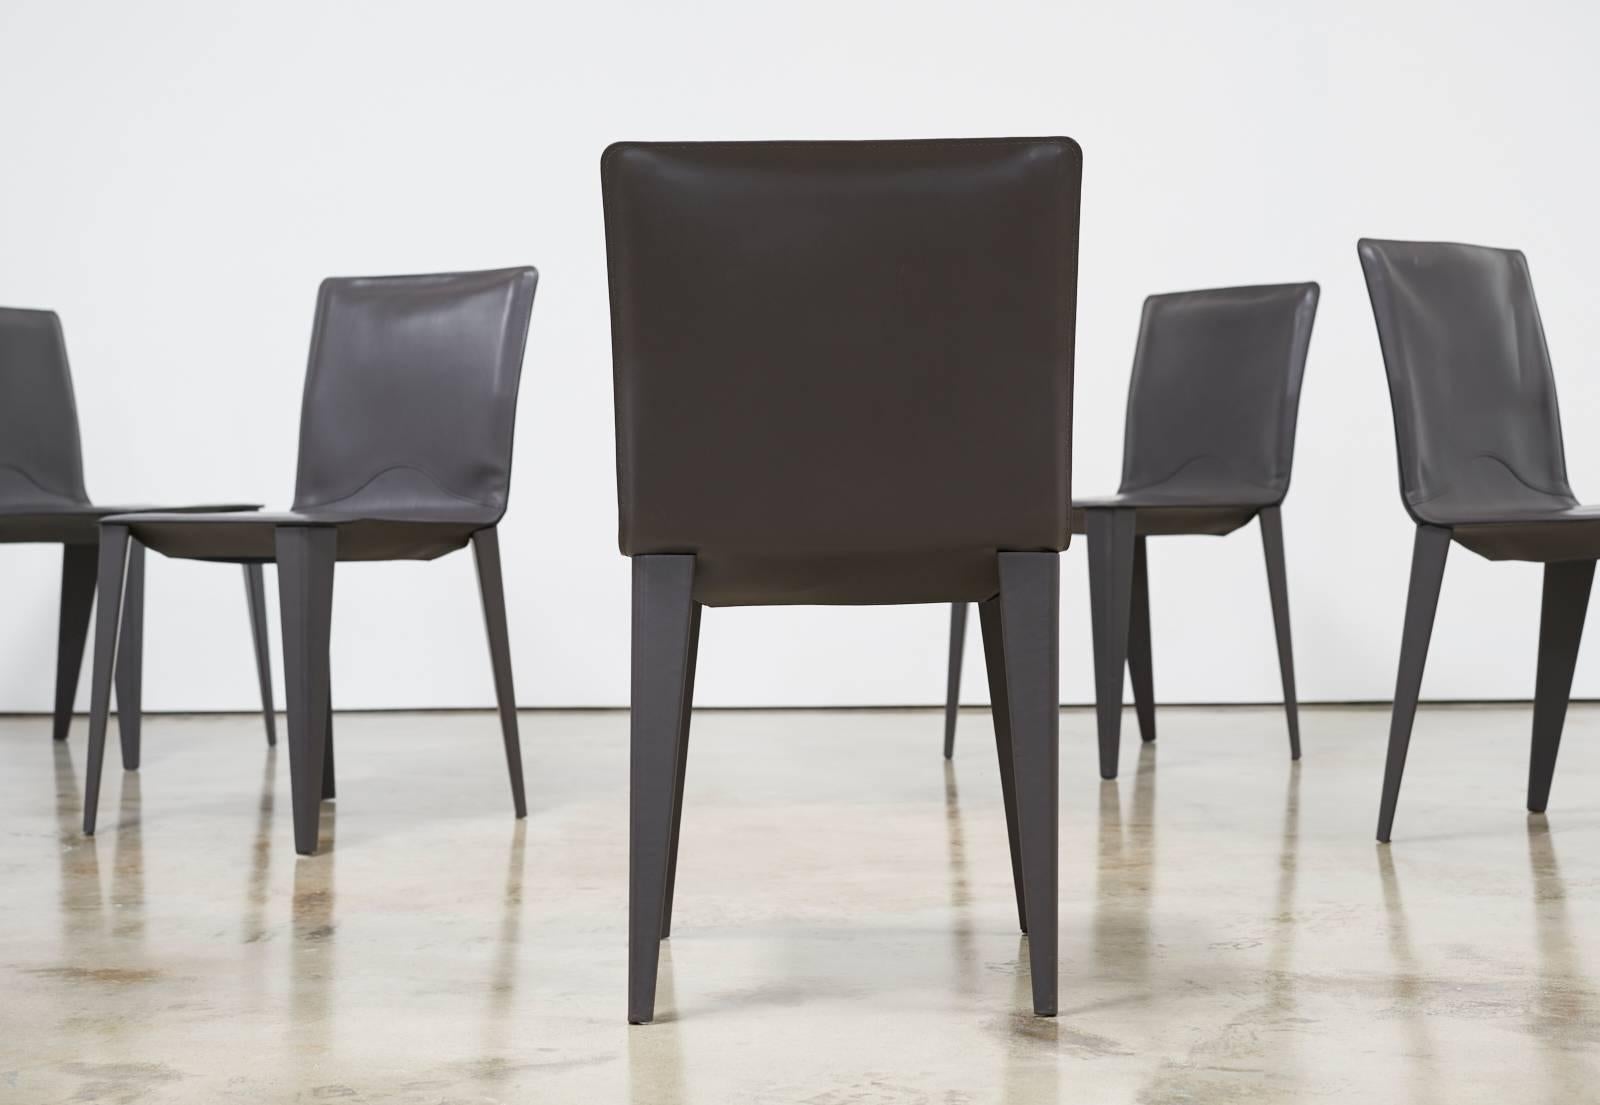 matteo grassi leather chairs